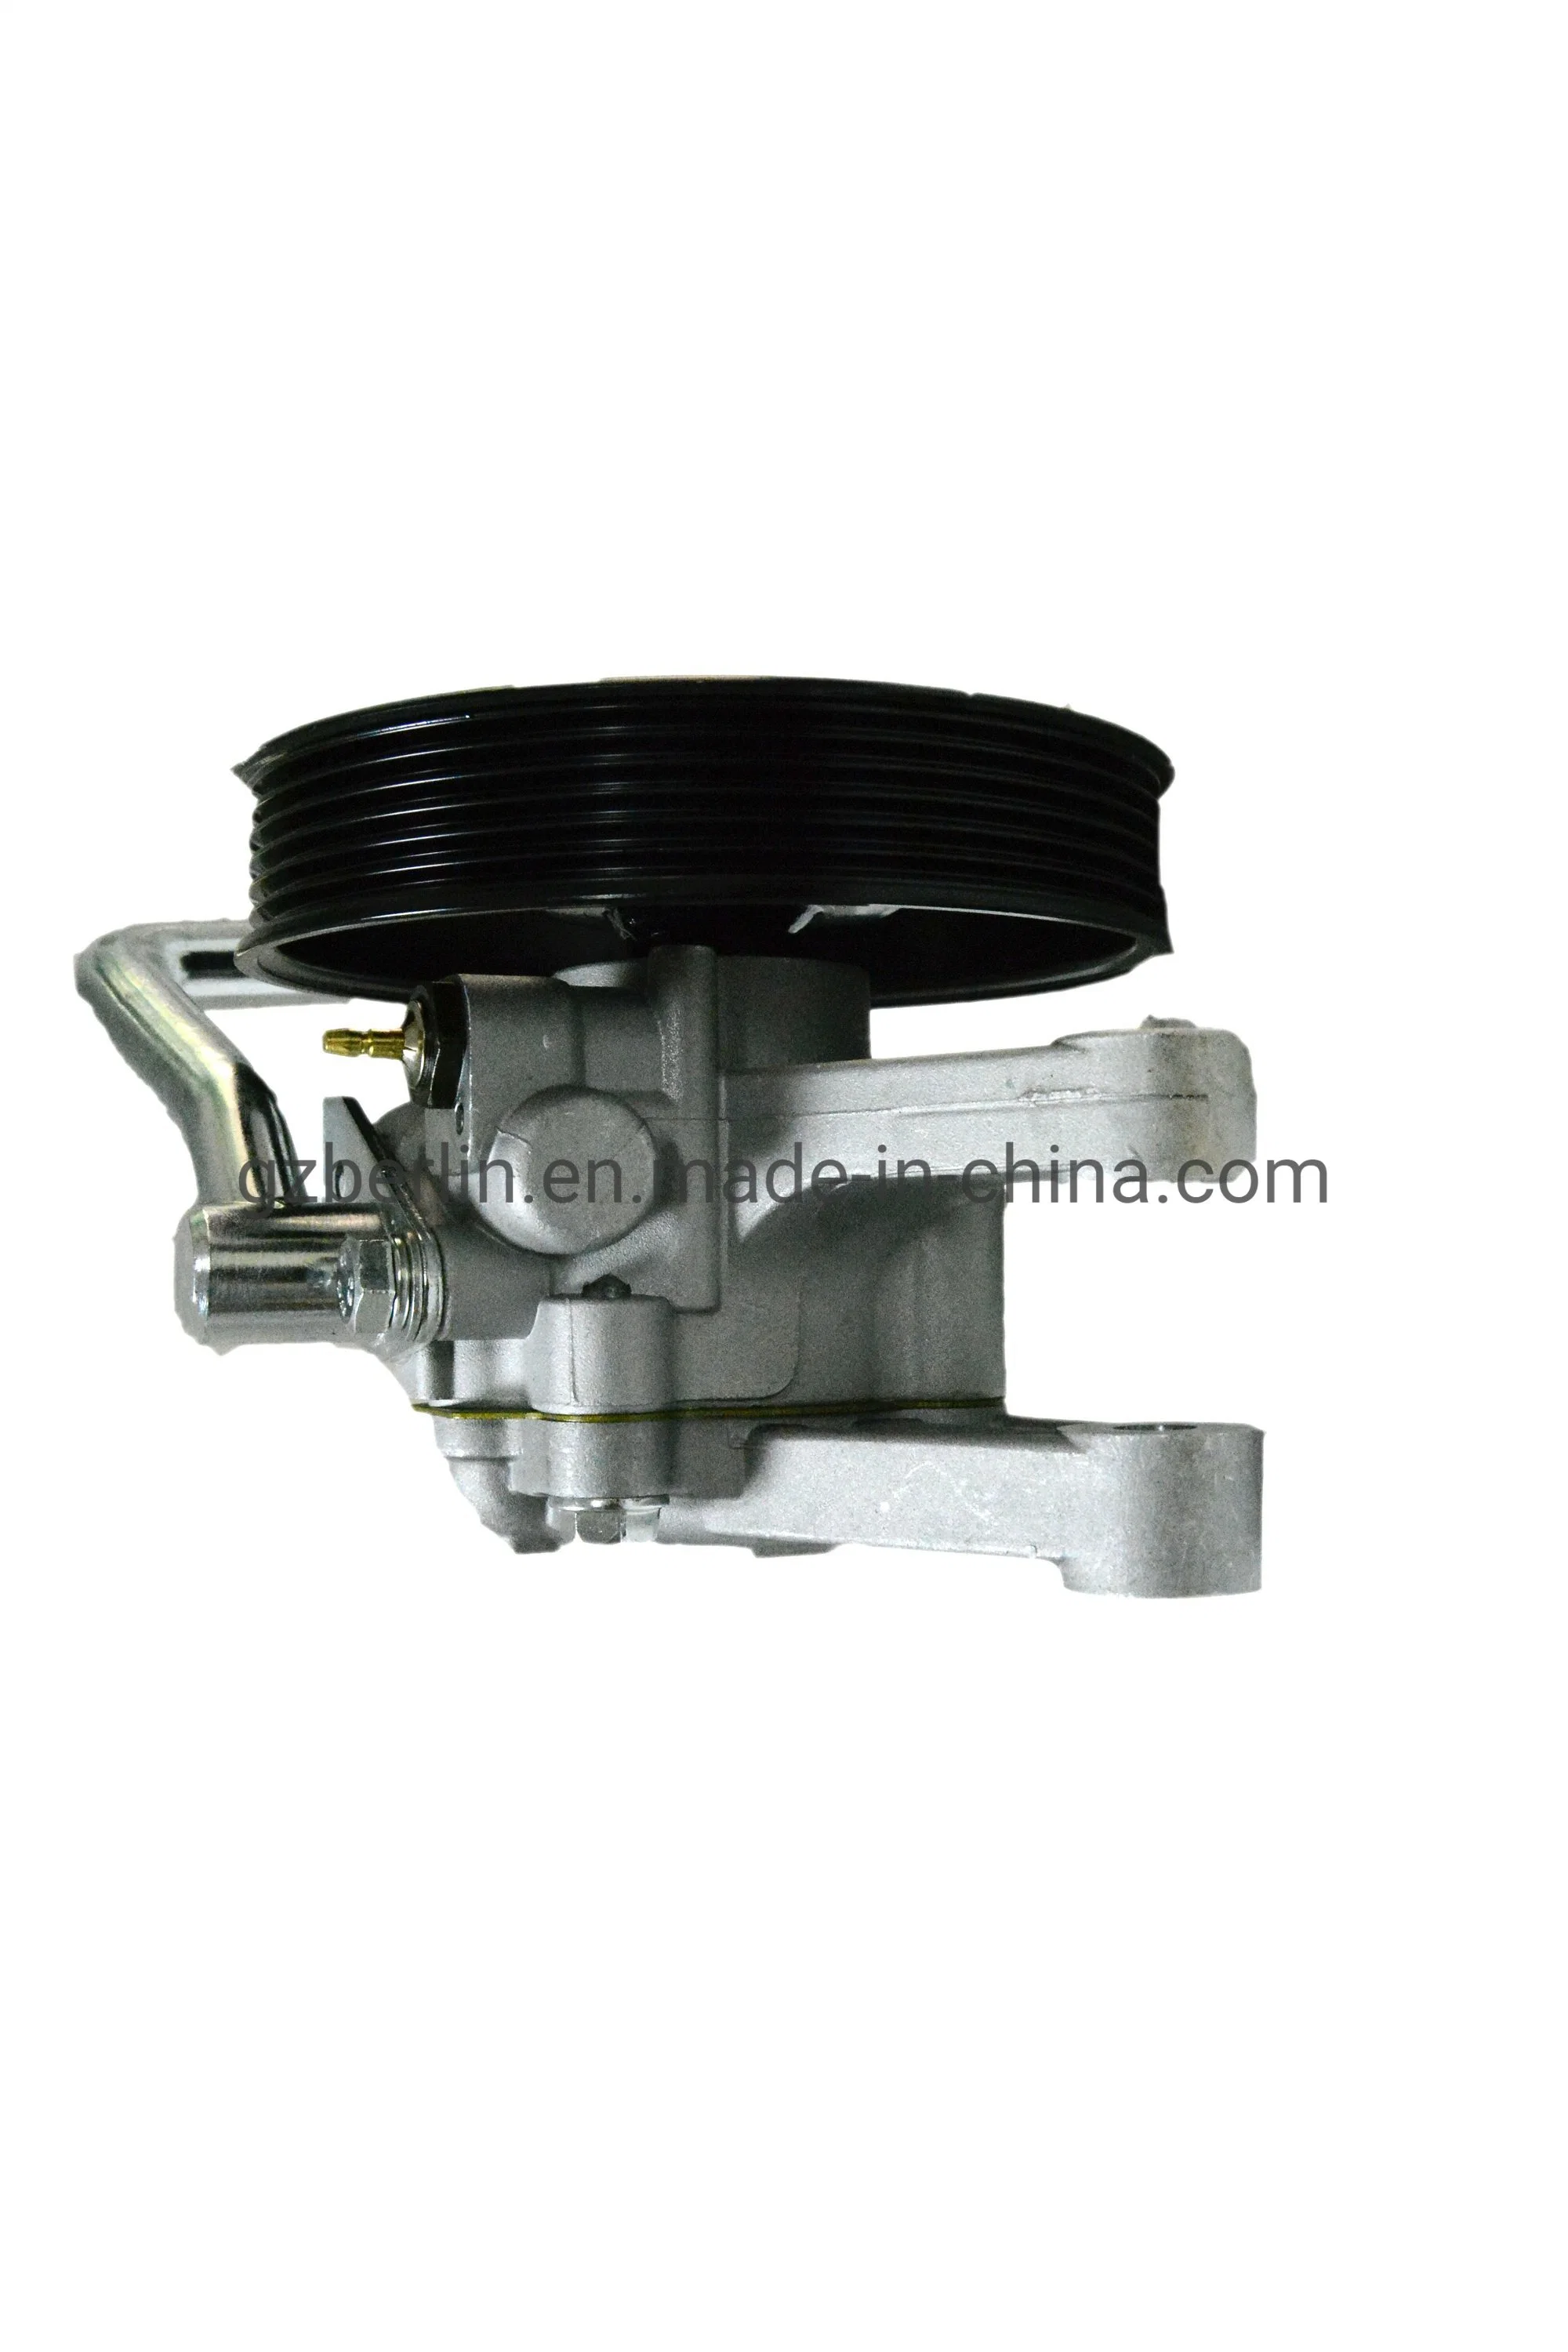 Spare Parts Power Steering Pump Auto Parts for Hyundai Hb20 1.6 57100-1s000